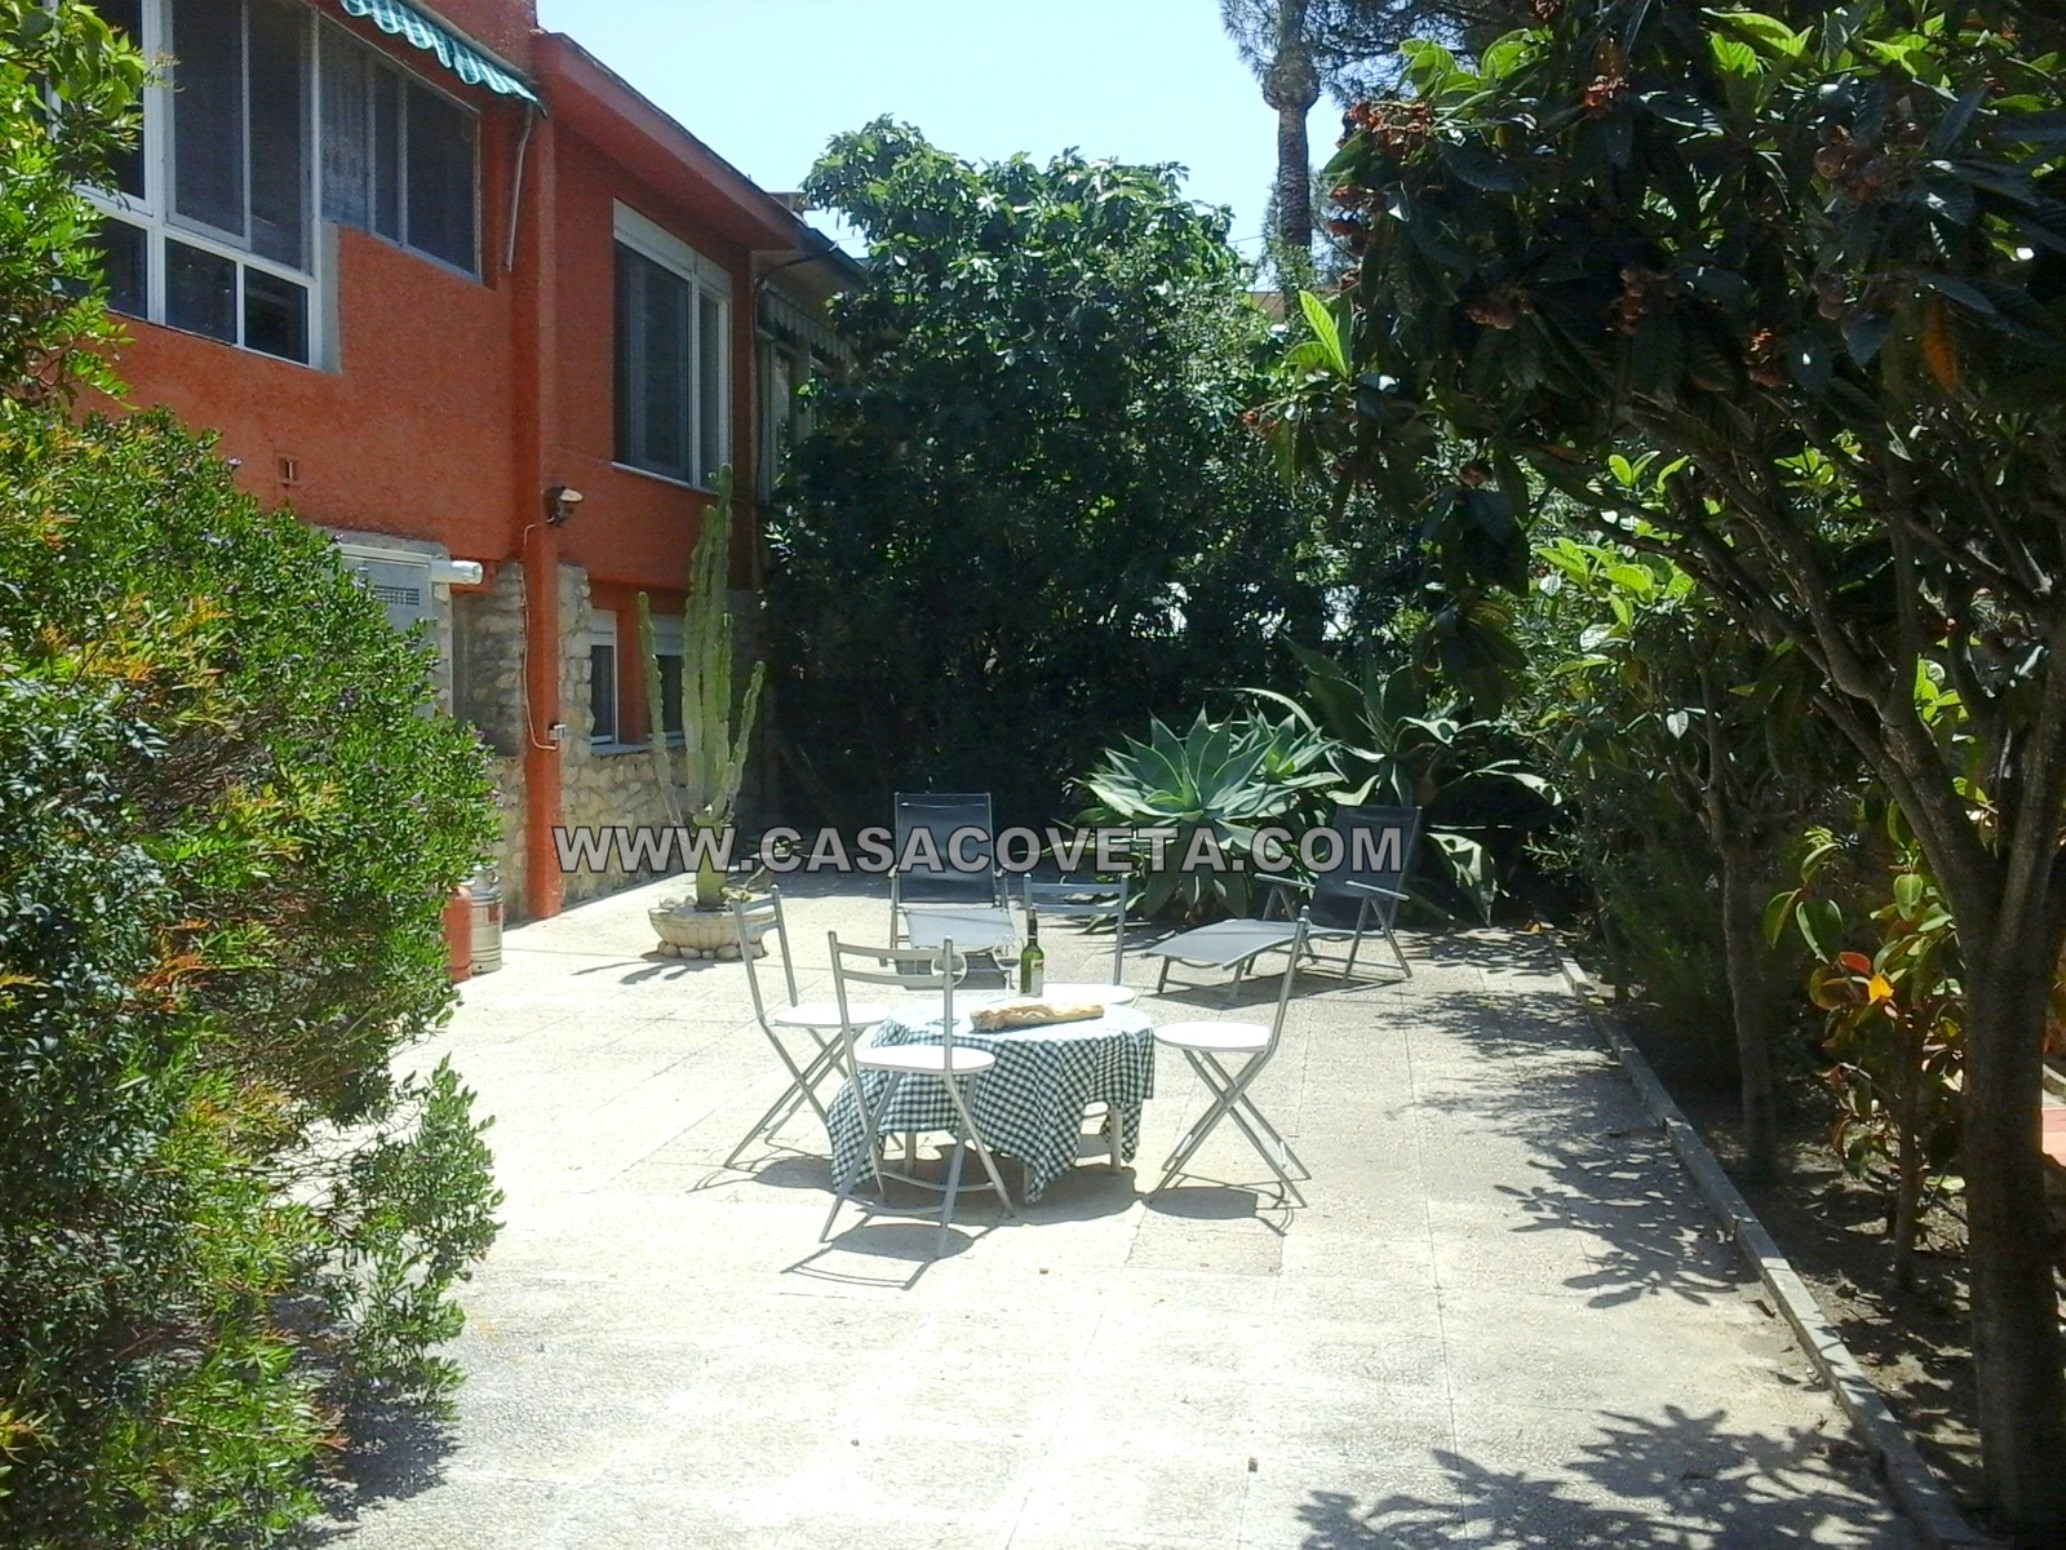 A wonderful House for 6-7 pers. with A/C near the mediterranean sea (100 mtr)  Ref. 552